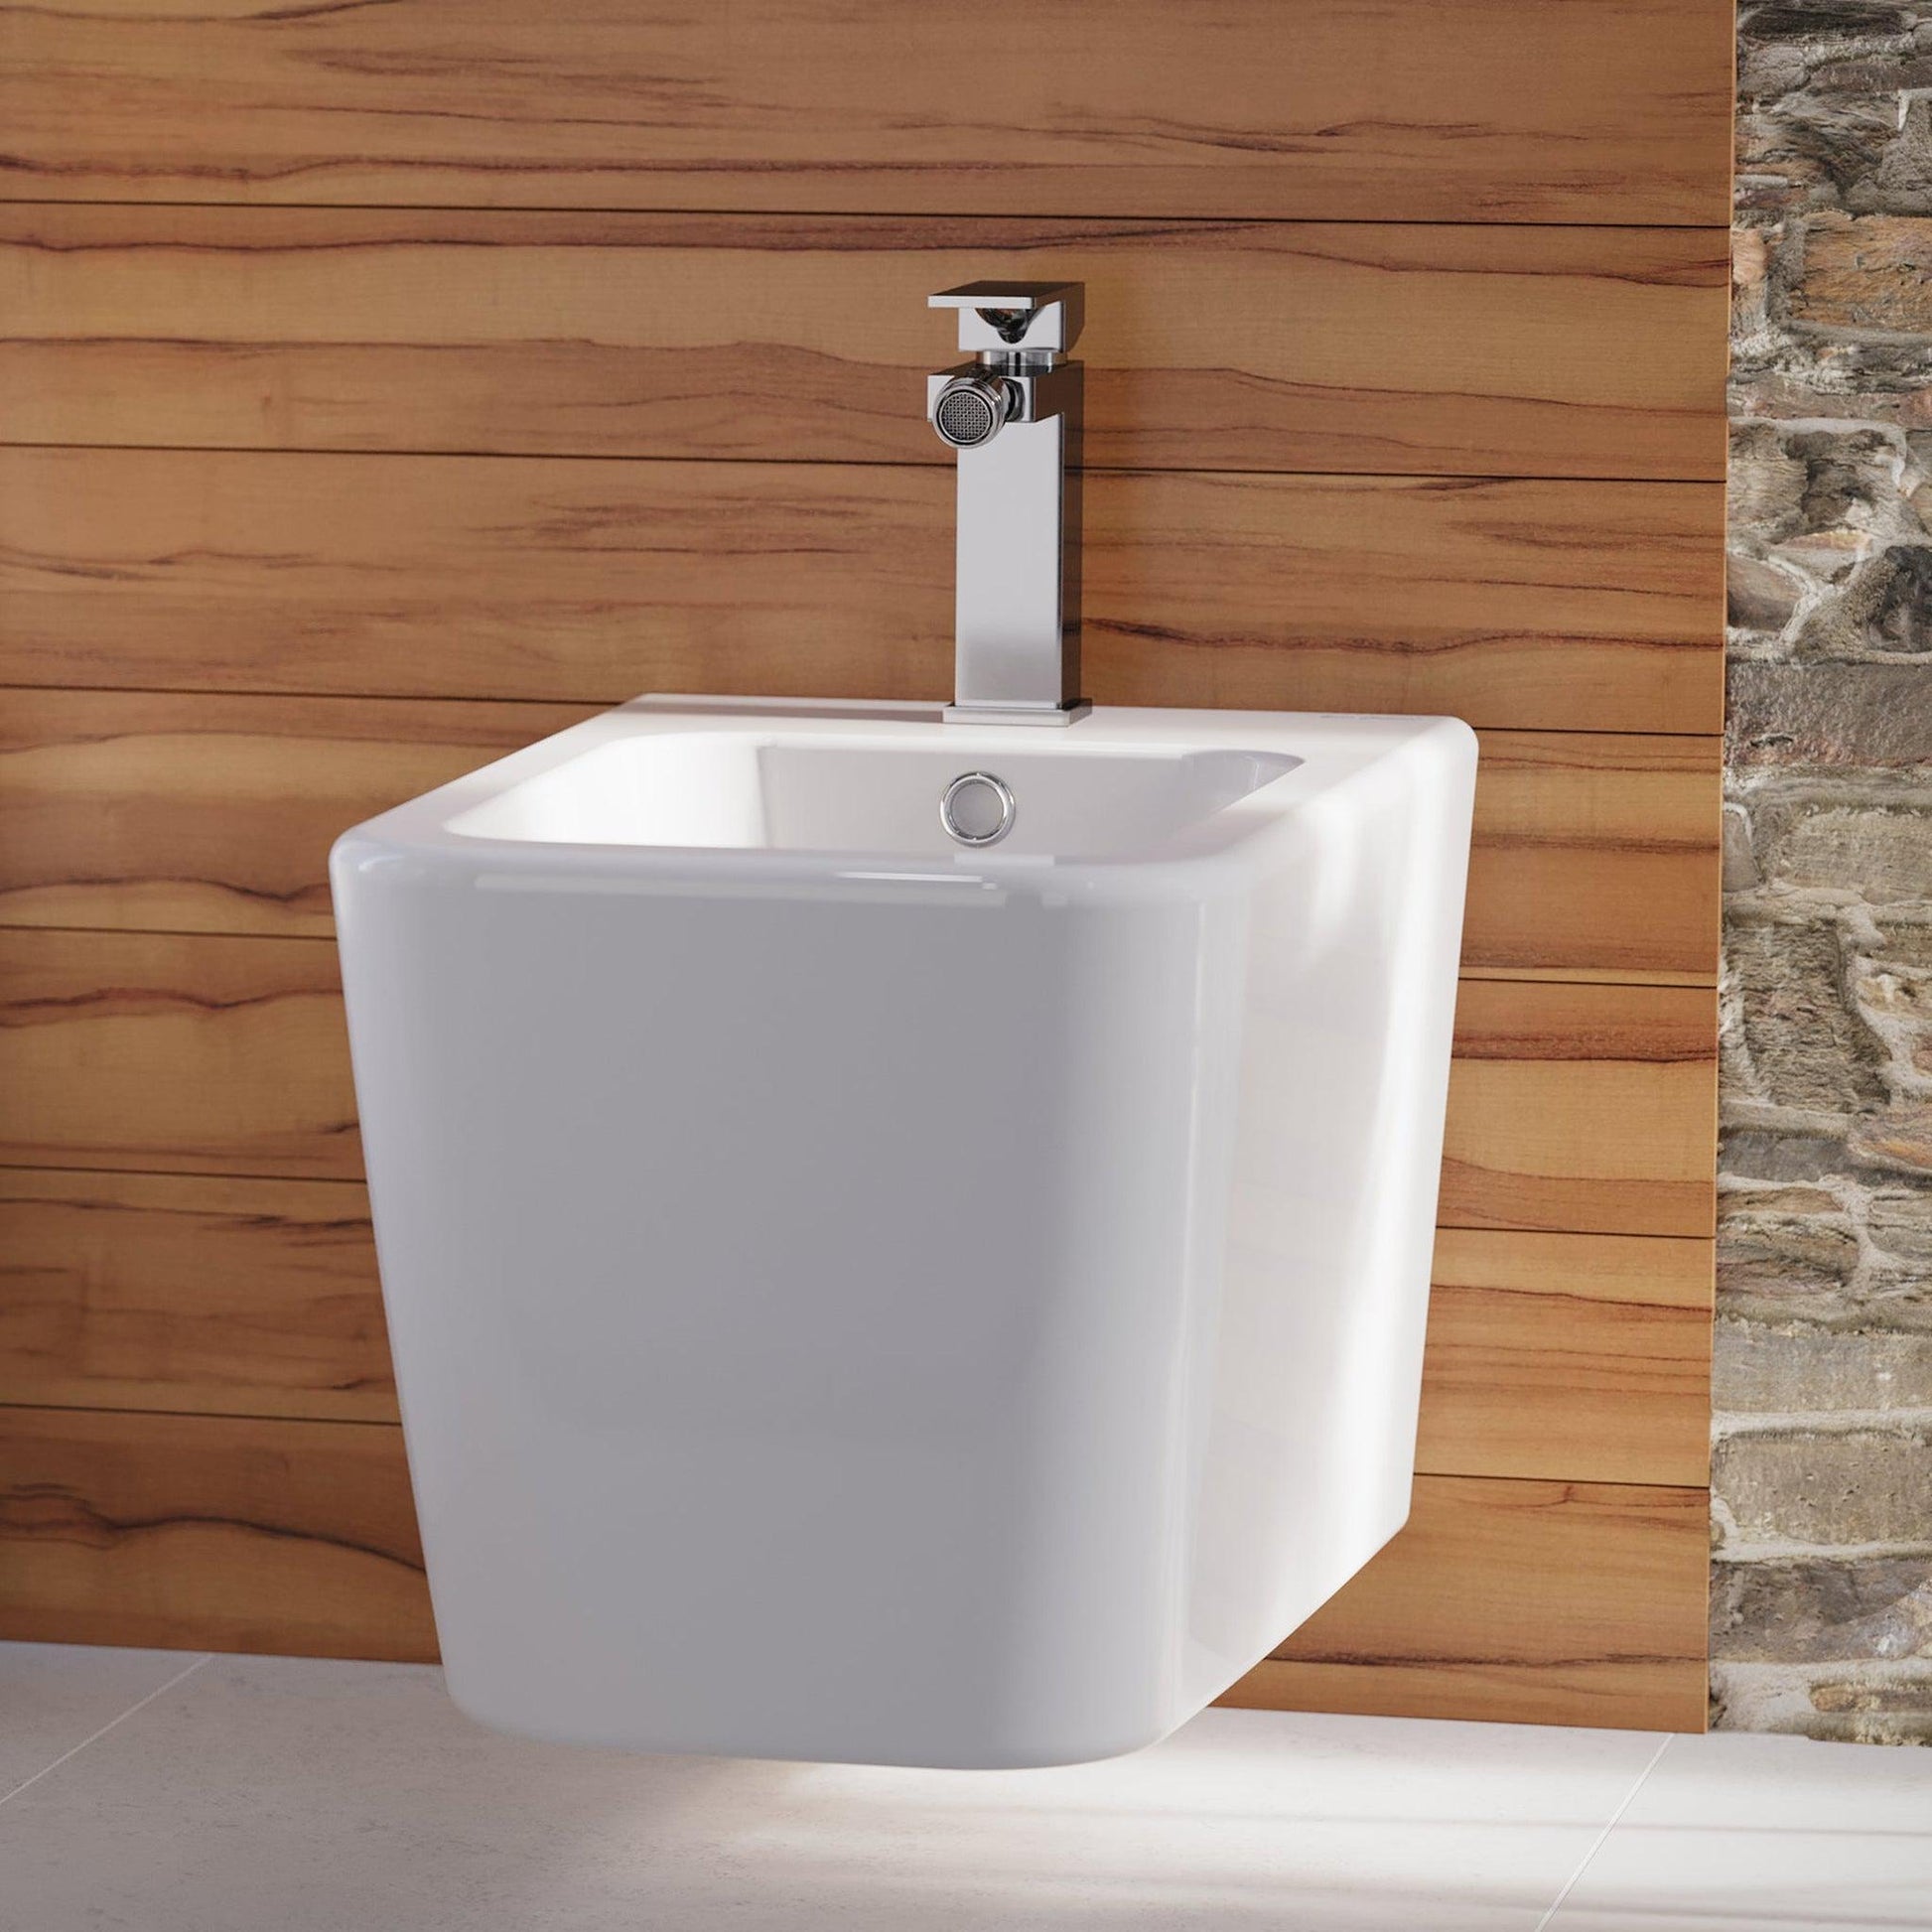 Swiss Madison Concorde 22" x 14" Glossy White Square Wall-Hung Bidet With Single Faucet Hole and Chrome Overflow Cover